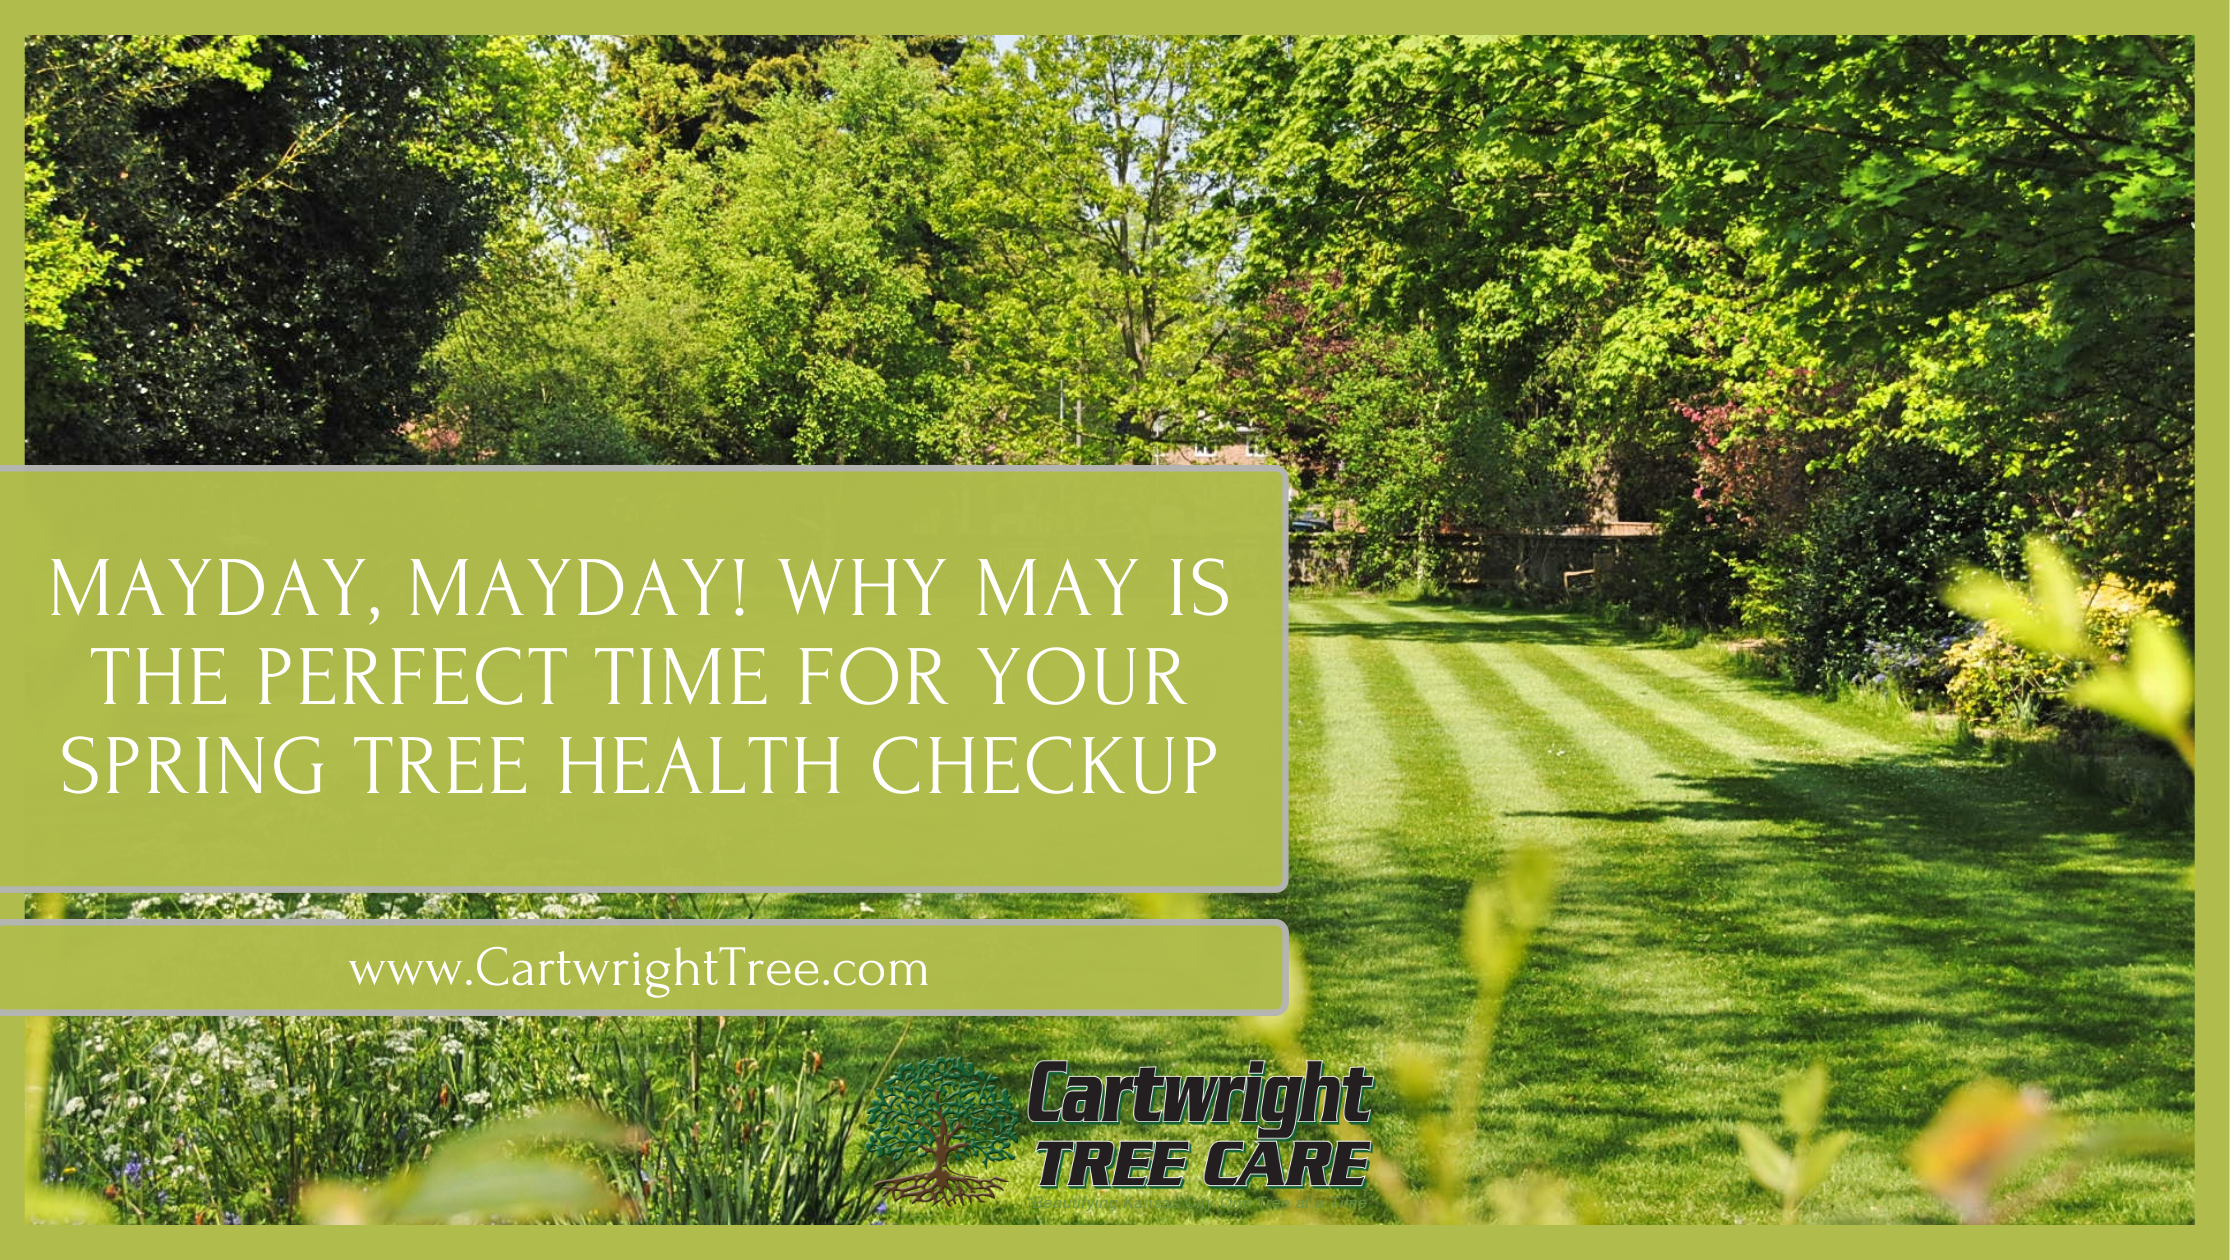 Mayday, Mayday Why May is the Perfect Time for Your Spring Tree Health Checkup